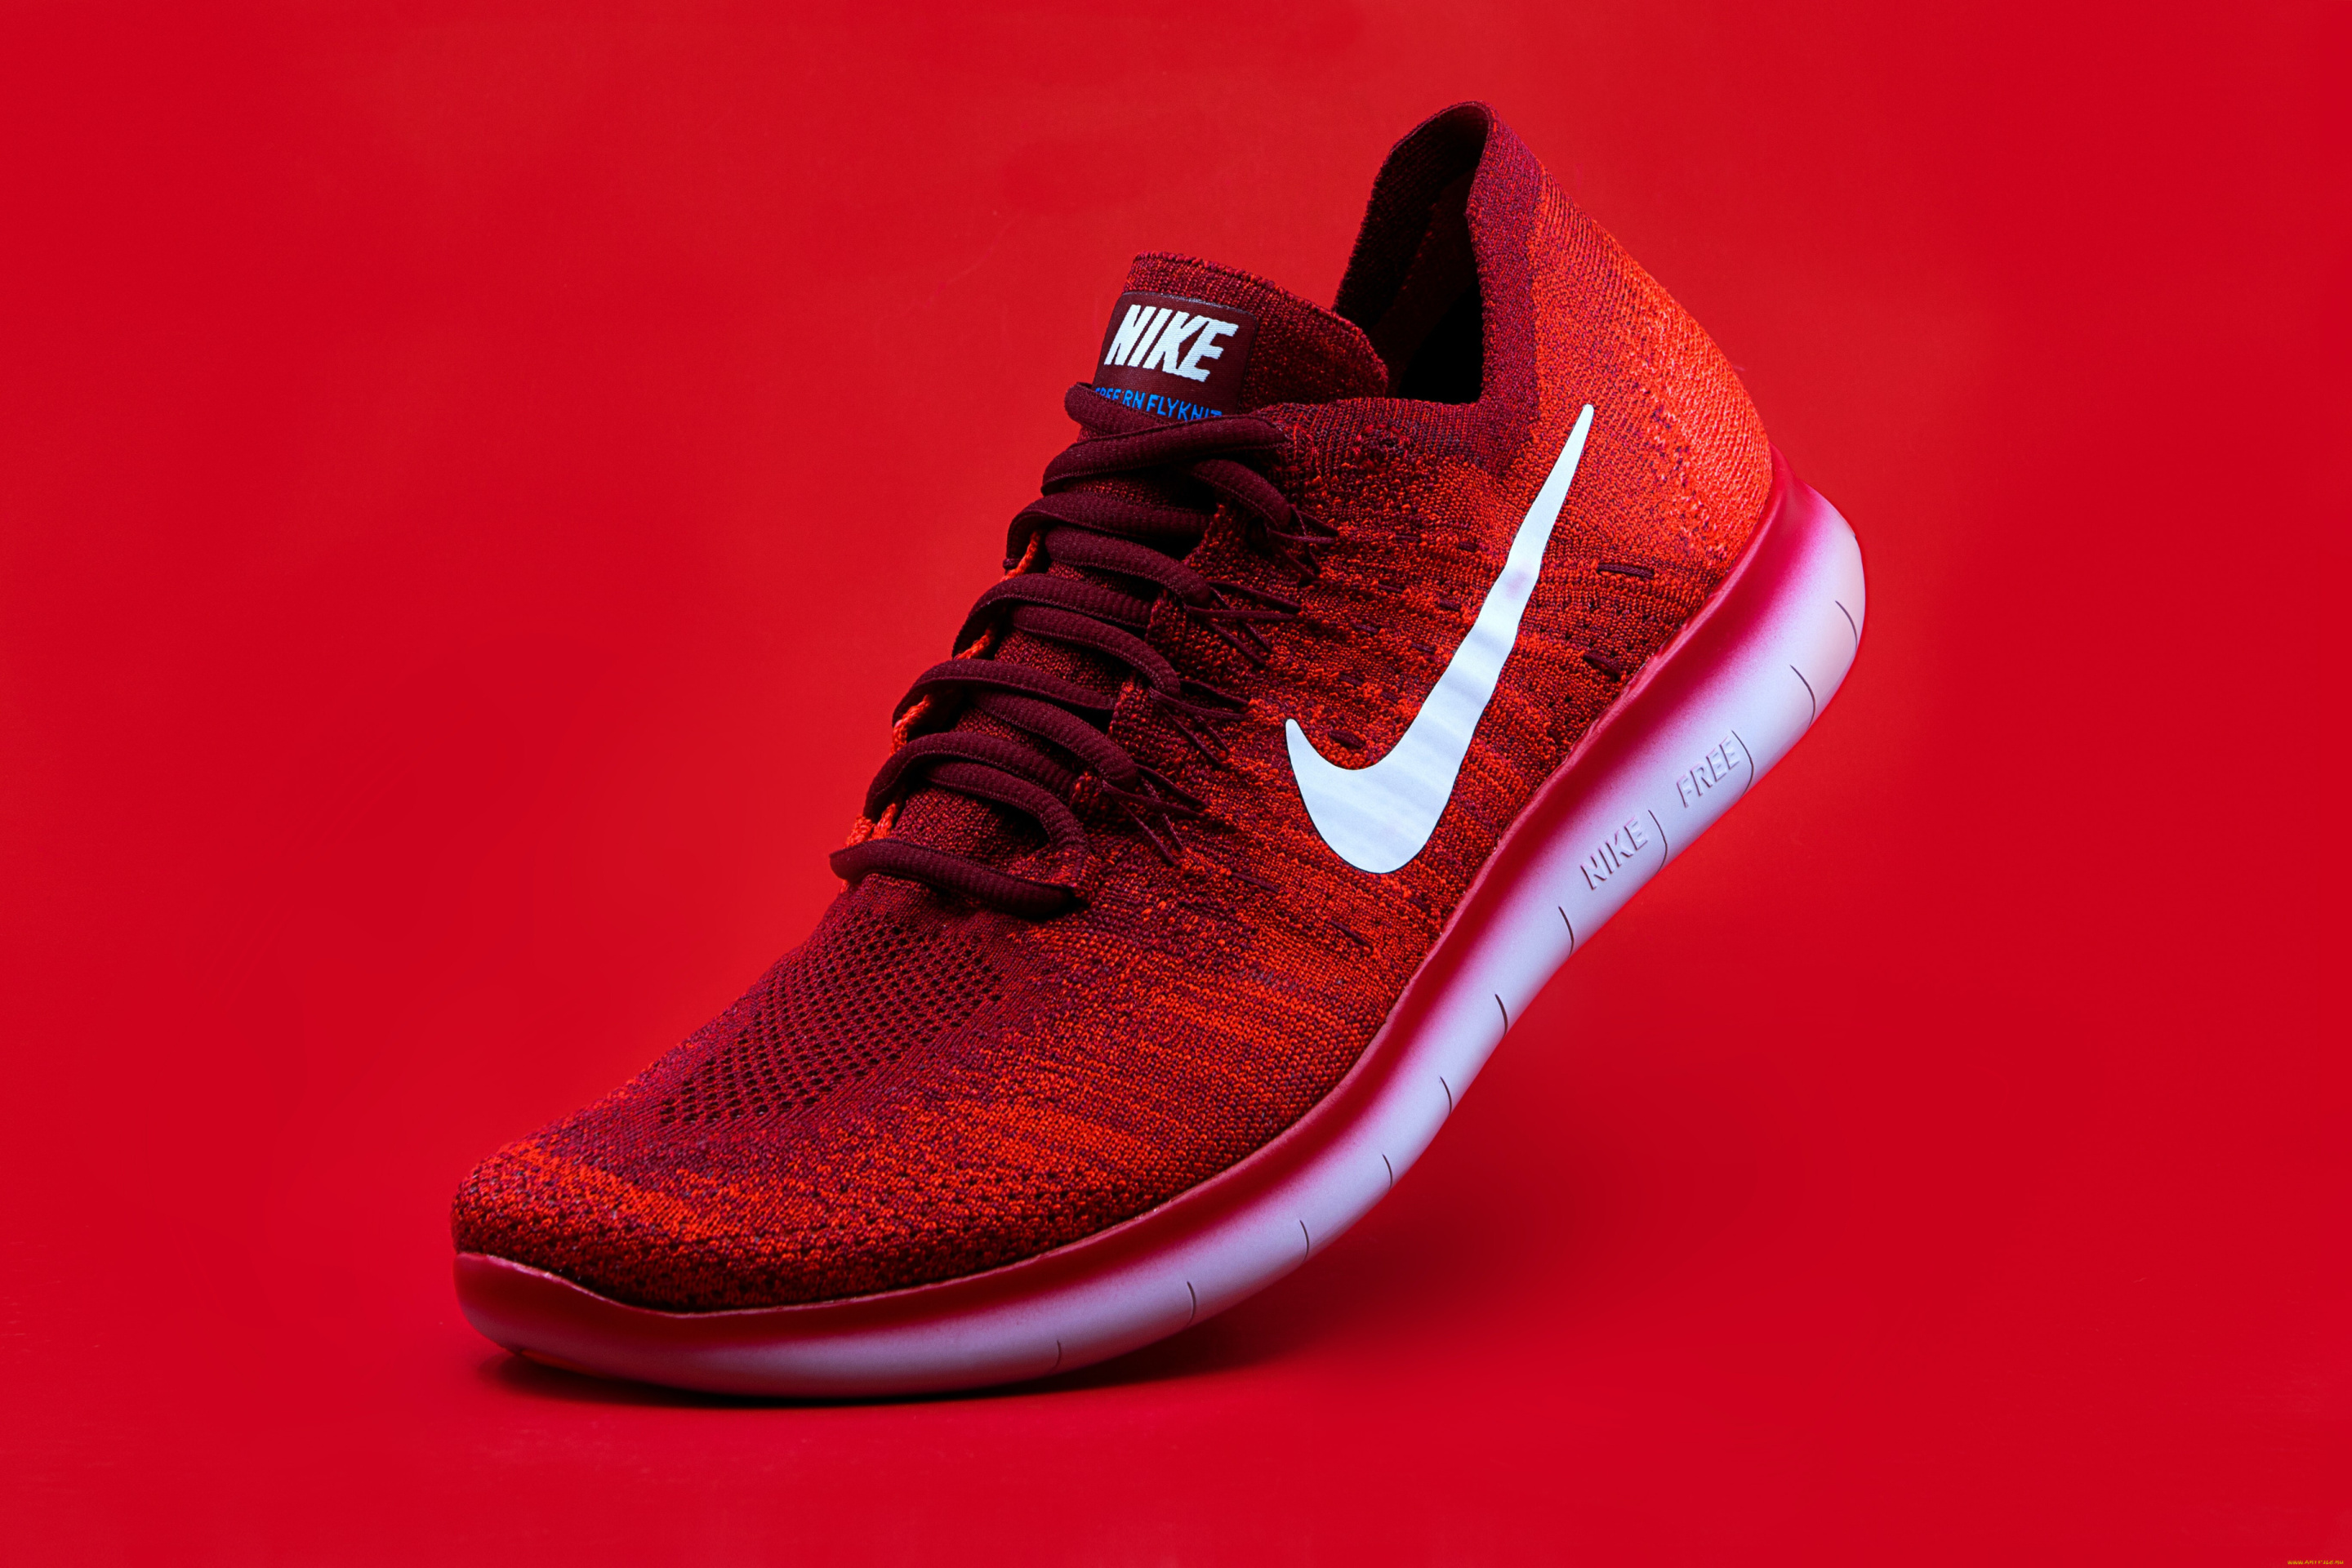 Red Nike Shoes wallpaper 2880x1920